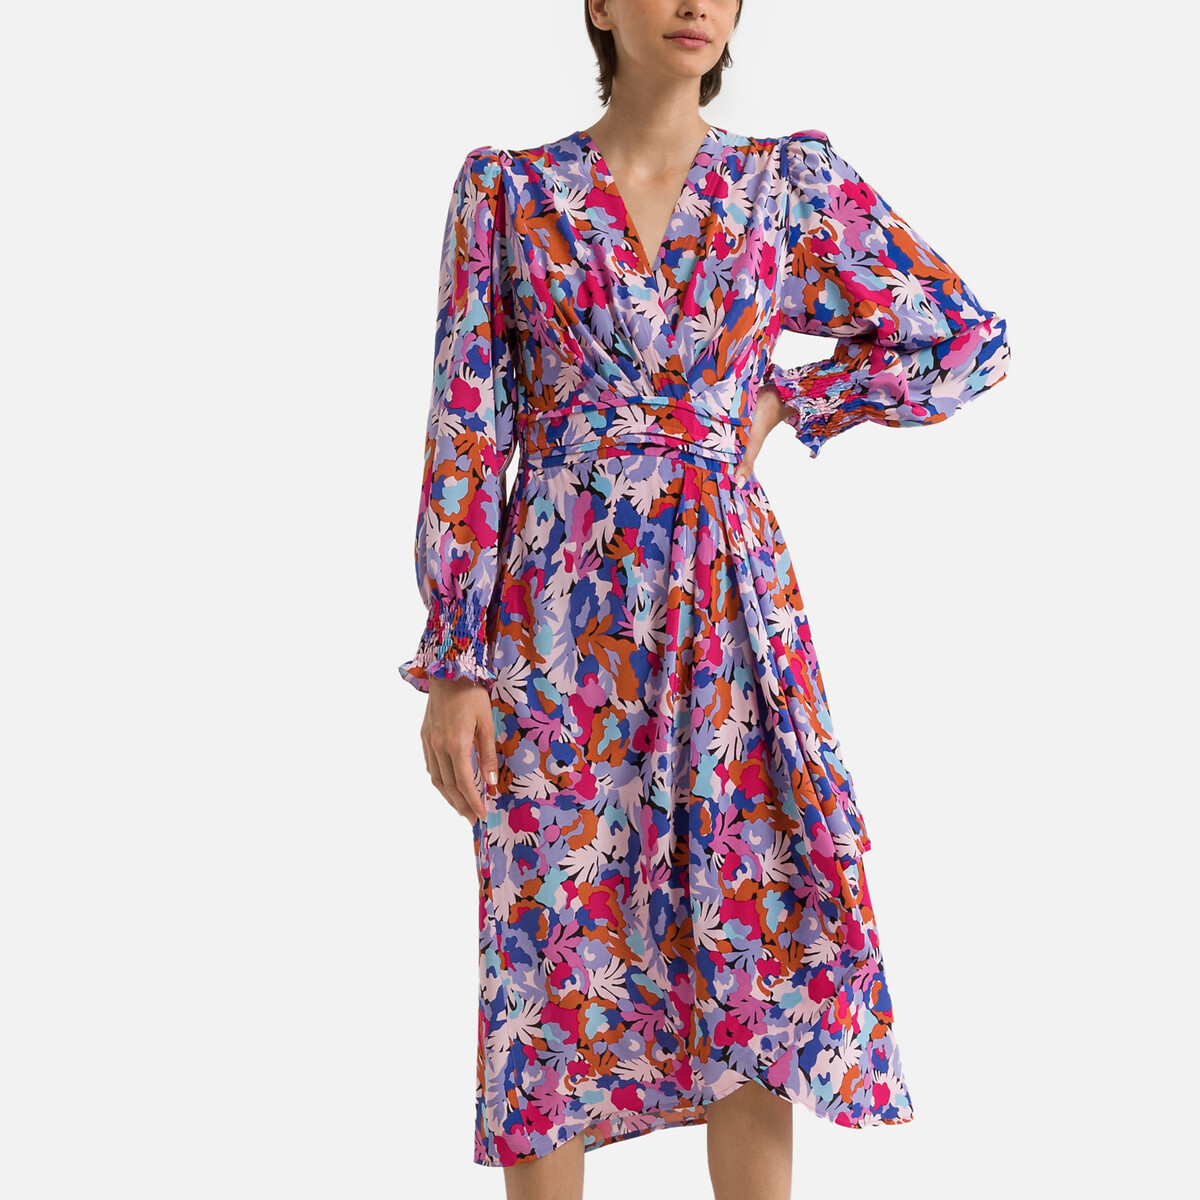 Cassie Floral Print Dress with Long Sleeves